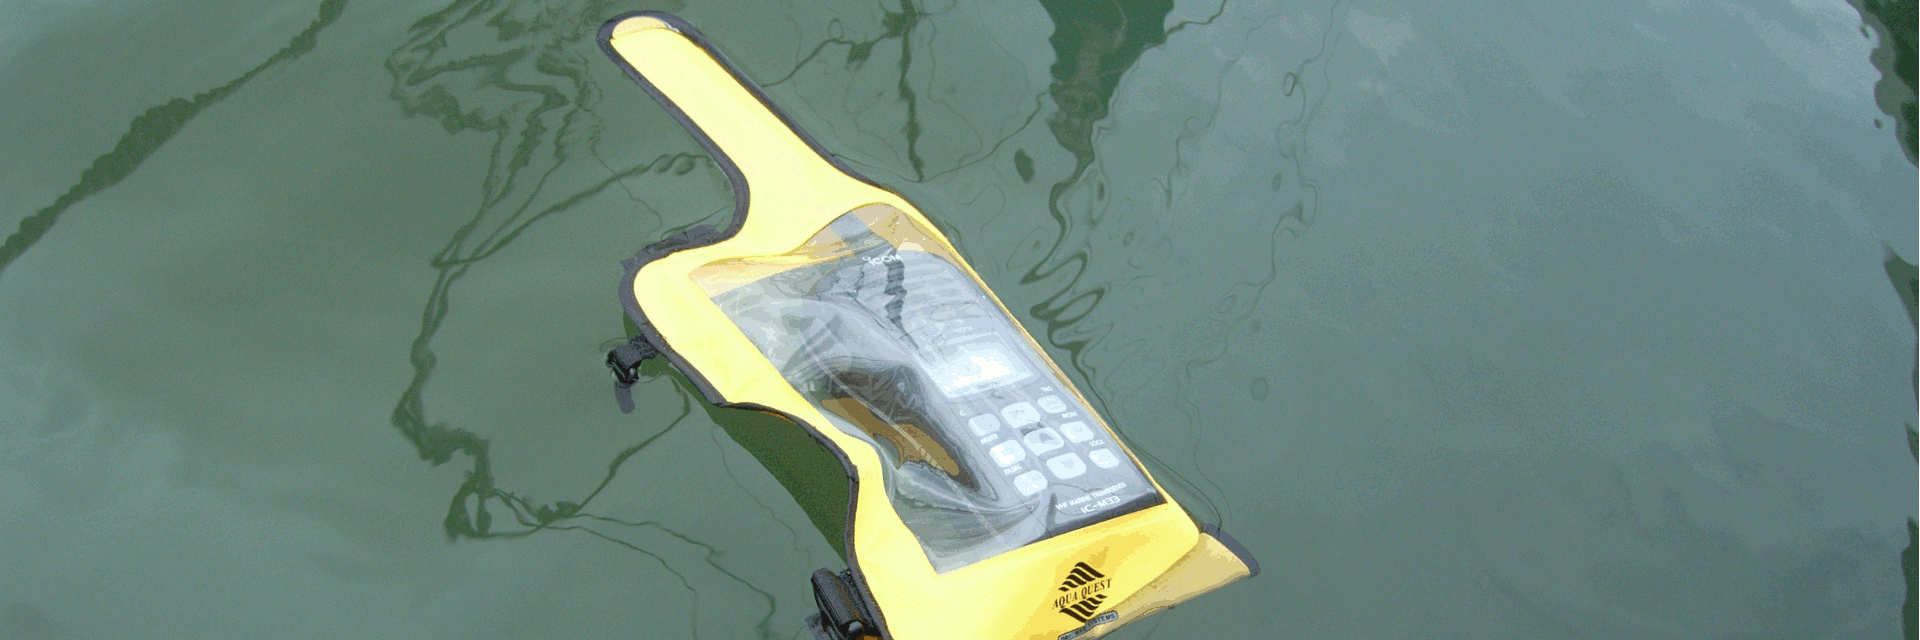 vhf dry bag floating on water